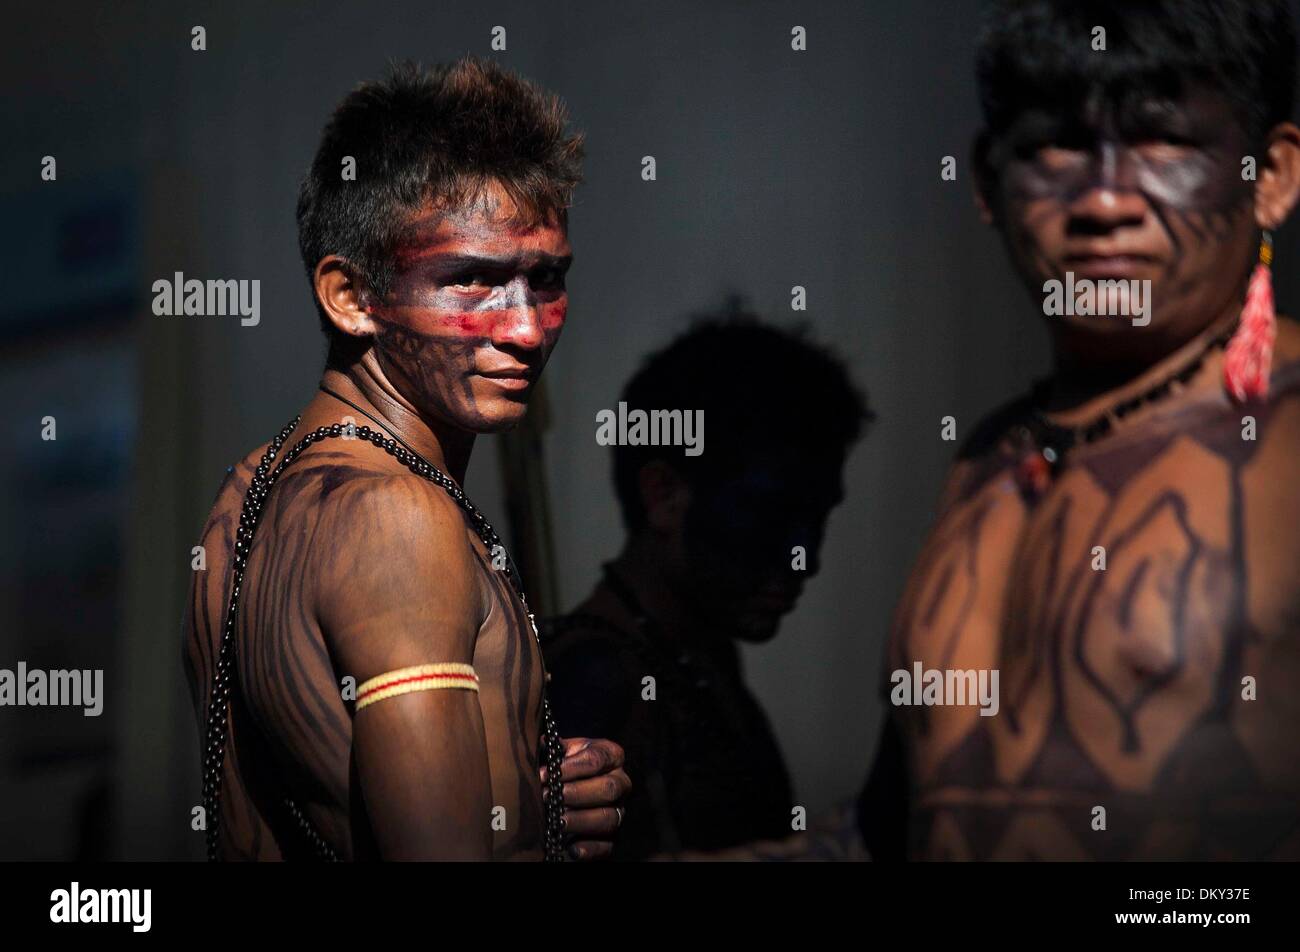 Belo Monte, Para, Brazil. 28th May, 2013. On May 27th, an indigenous group made up predominantly of Munduruku occupied Belo Monte and halted construction on the main turbine site. The indigenous Xikrin people live on the Bacaja, a tributary of the Xingu River, where construction of the Belo Monte Dam is reaching peak construction. Some scientists warn that the water level of the Bacaja will decrease precipitously due to the dam thus effecting agriculture for survival. (Credit Image: © Taylor Weidman/ZUMA Press) Stock Photo